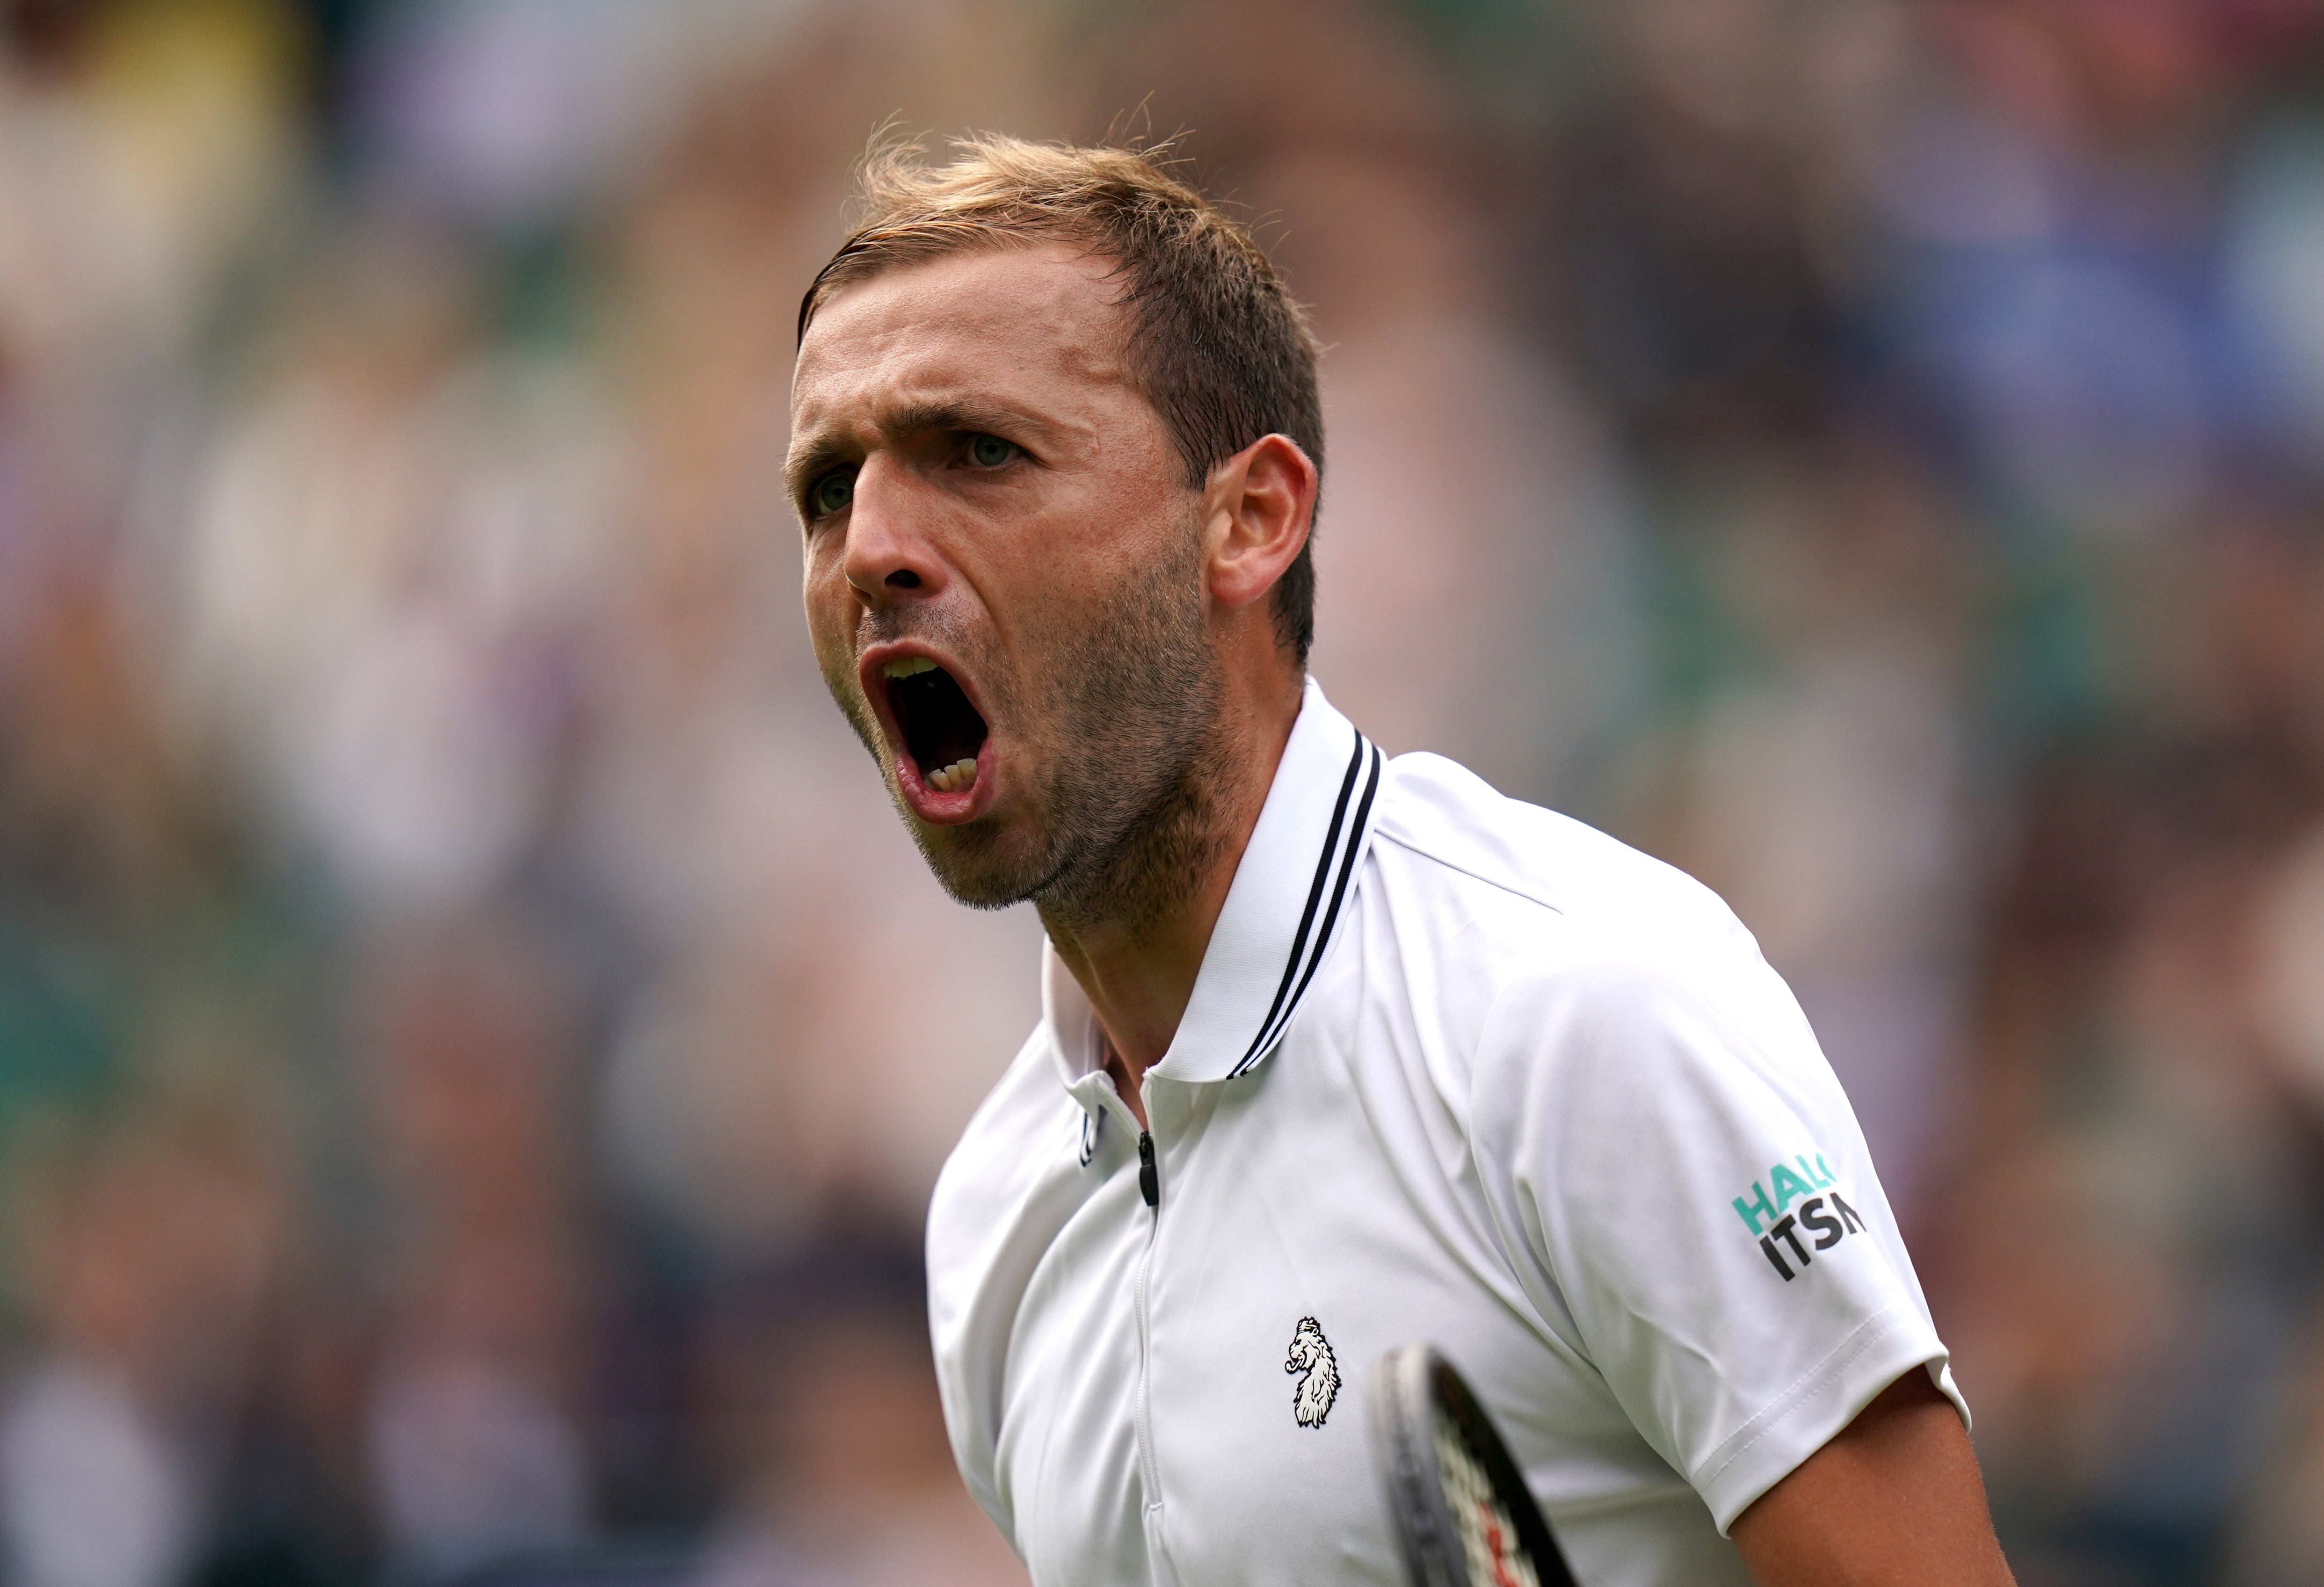 Dan Evans was in fine form as he booked his place in the third round of Wimbledon